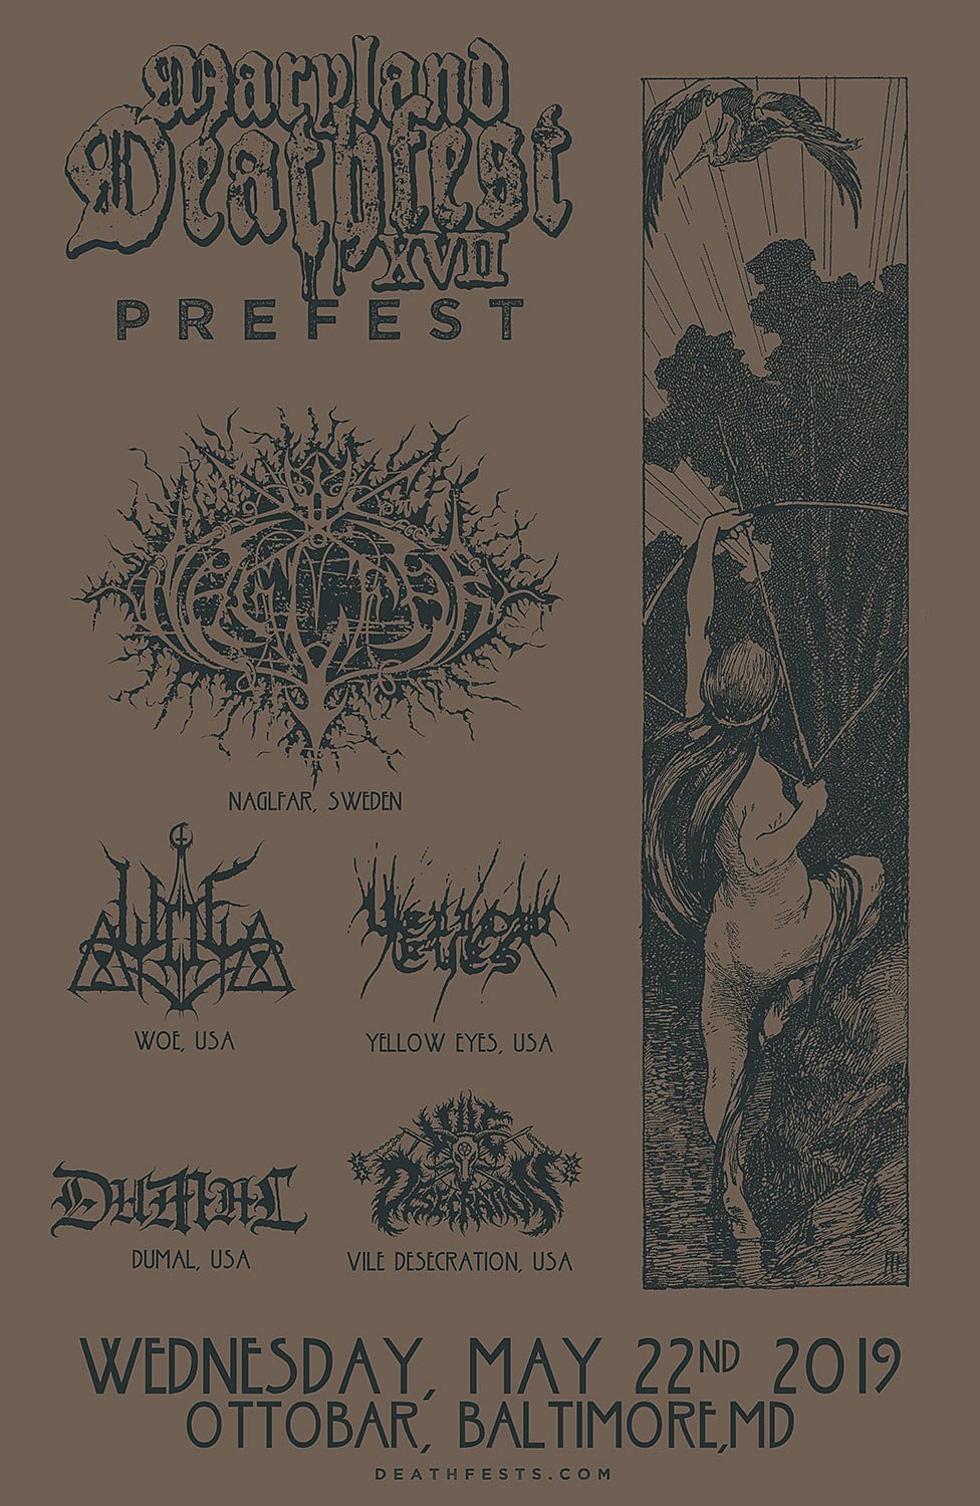 Goatmoon patch gets guy kicked out of Maryland Deathfest show, he says